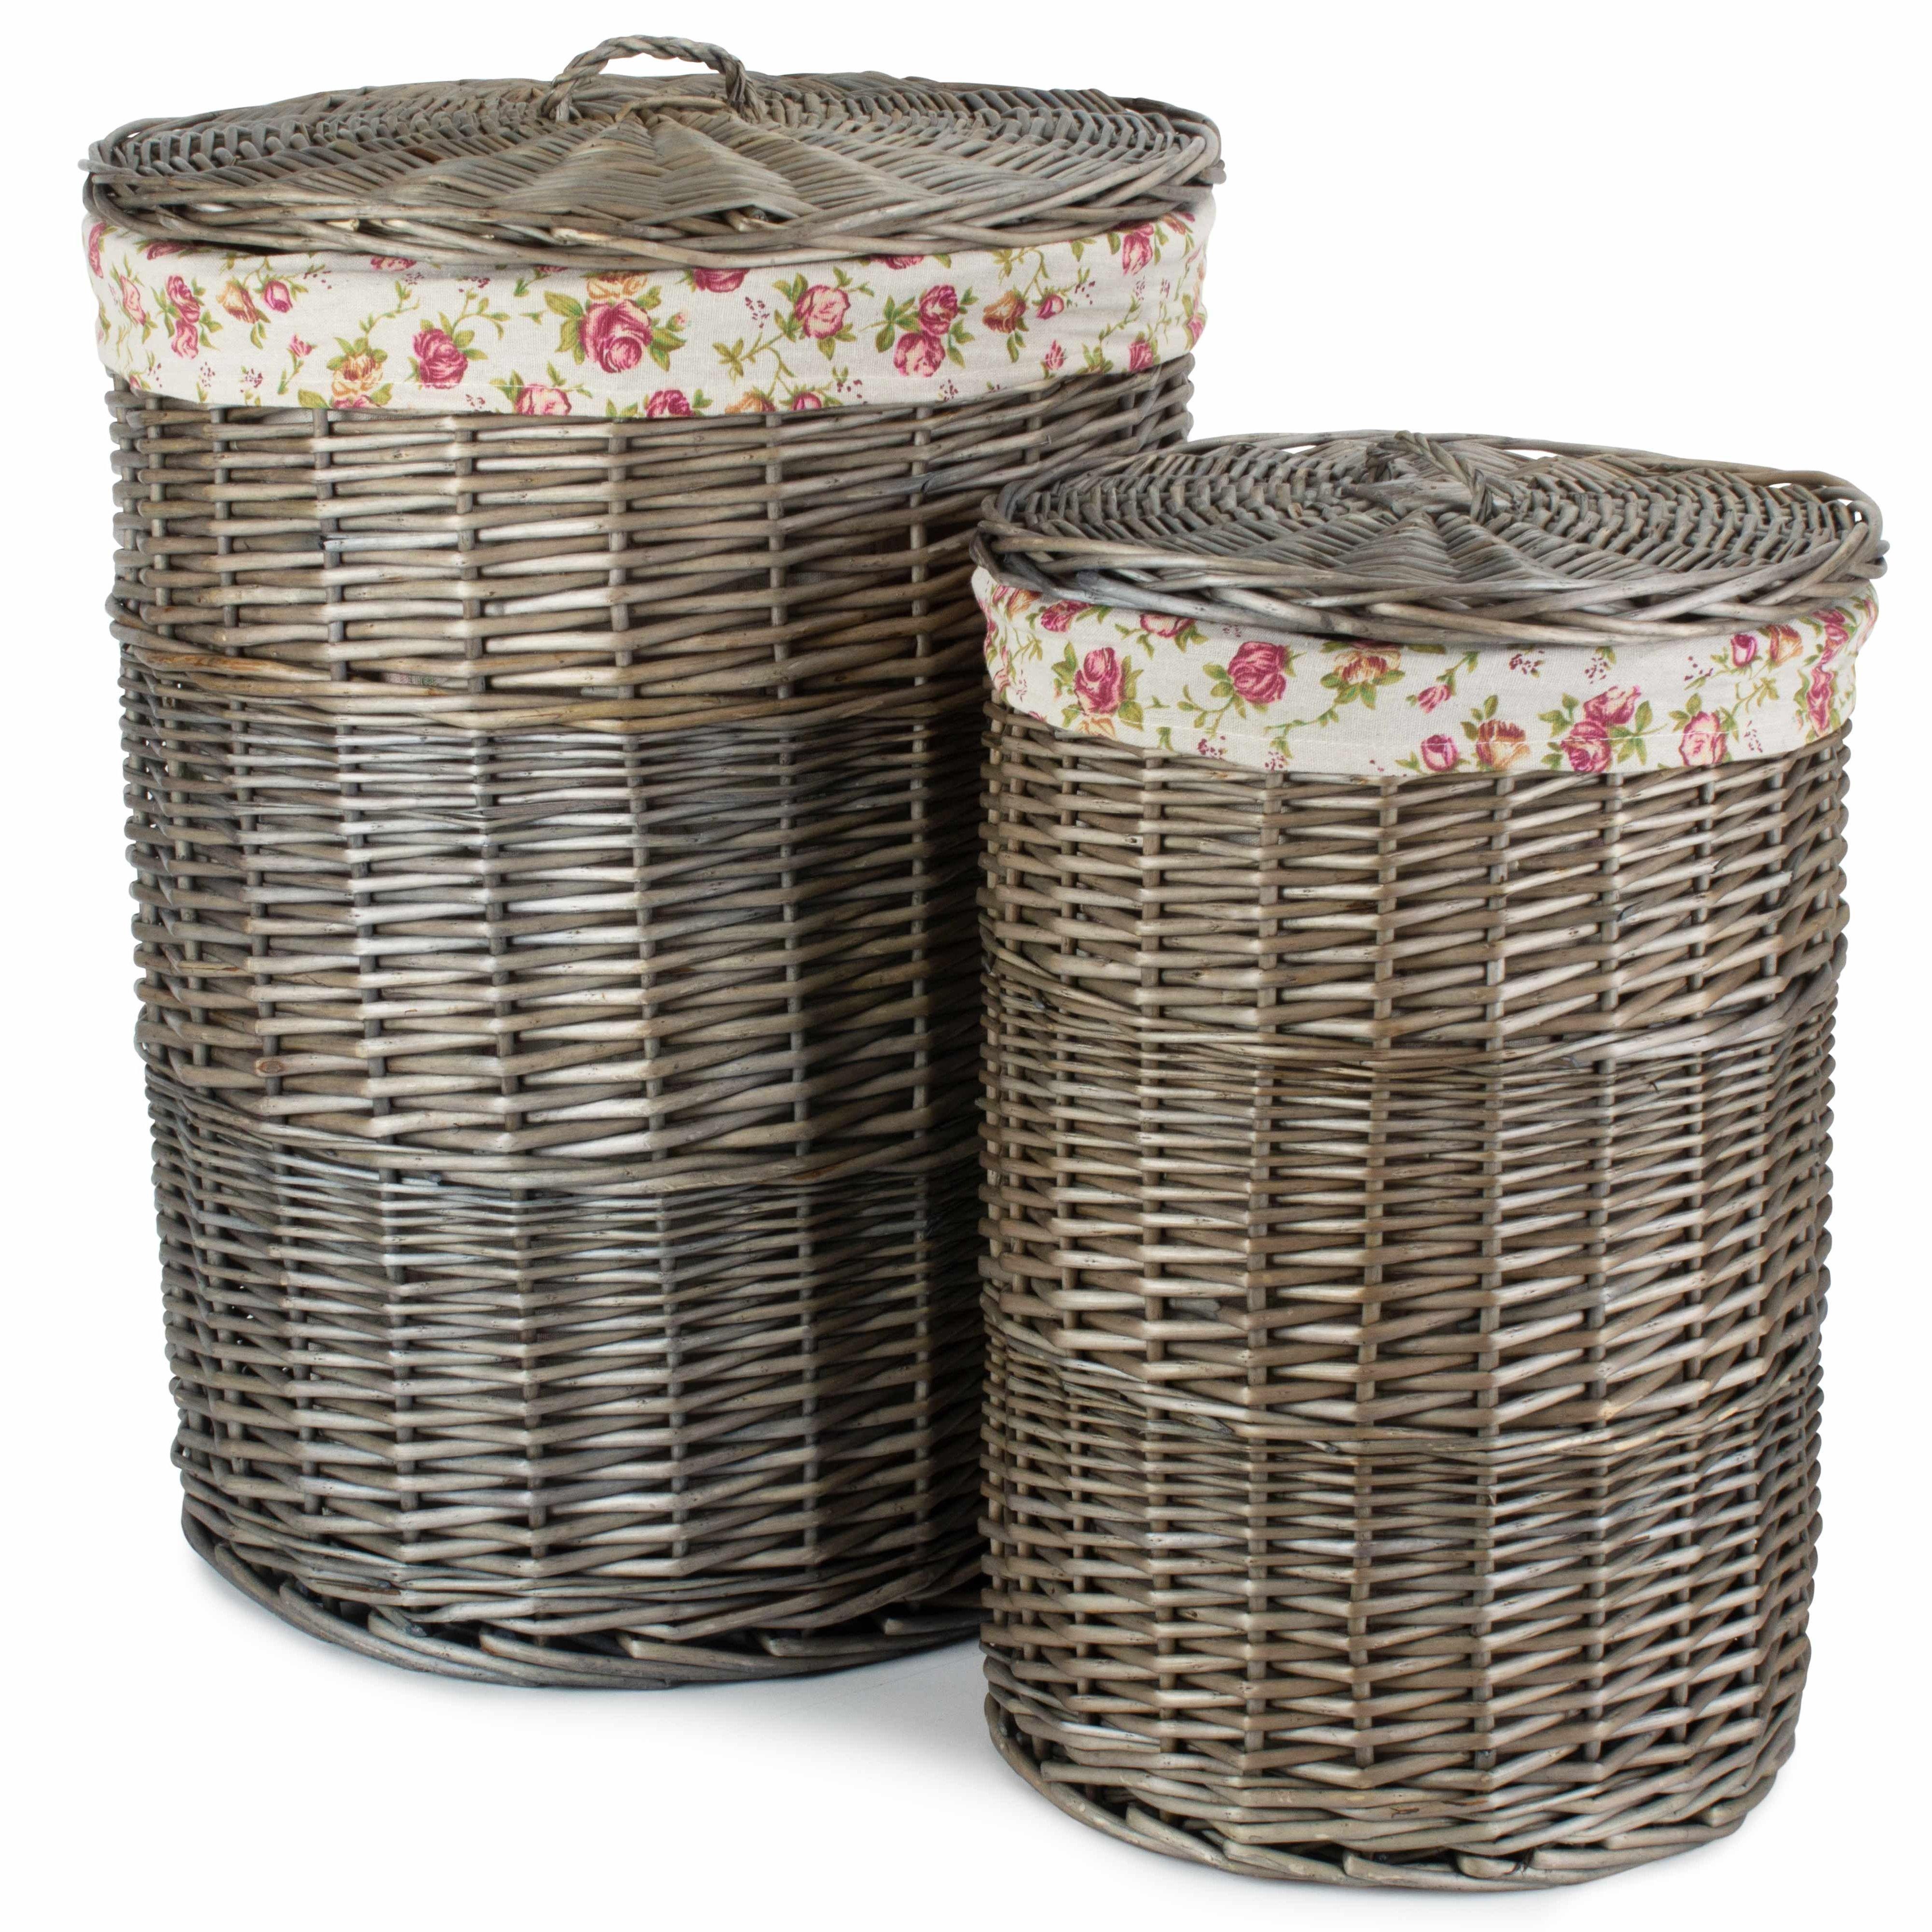 Set of 2 Cotton Lined Wicker Antique Wash Round Laundry Baskets